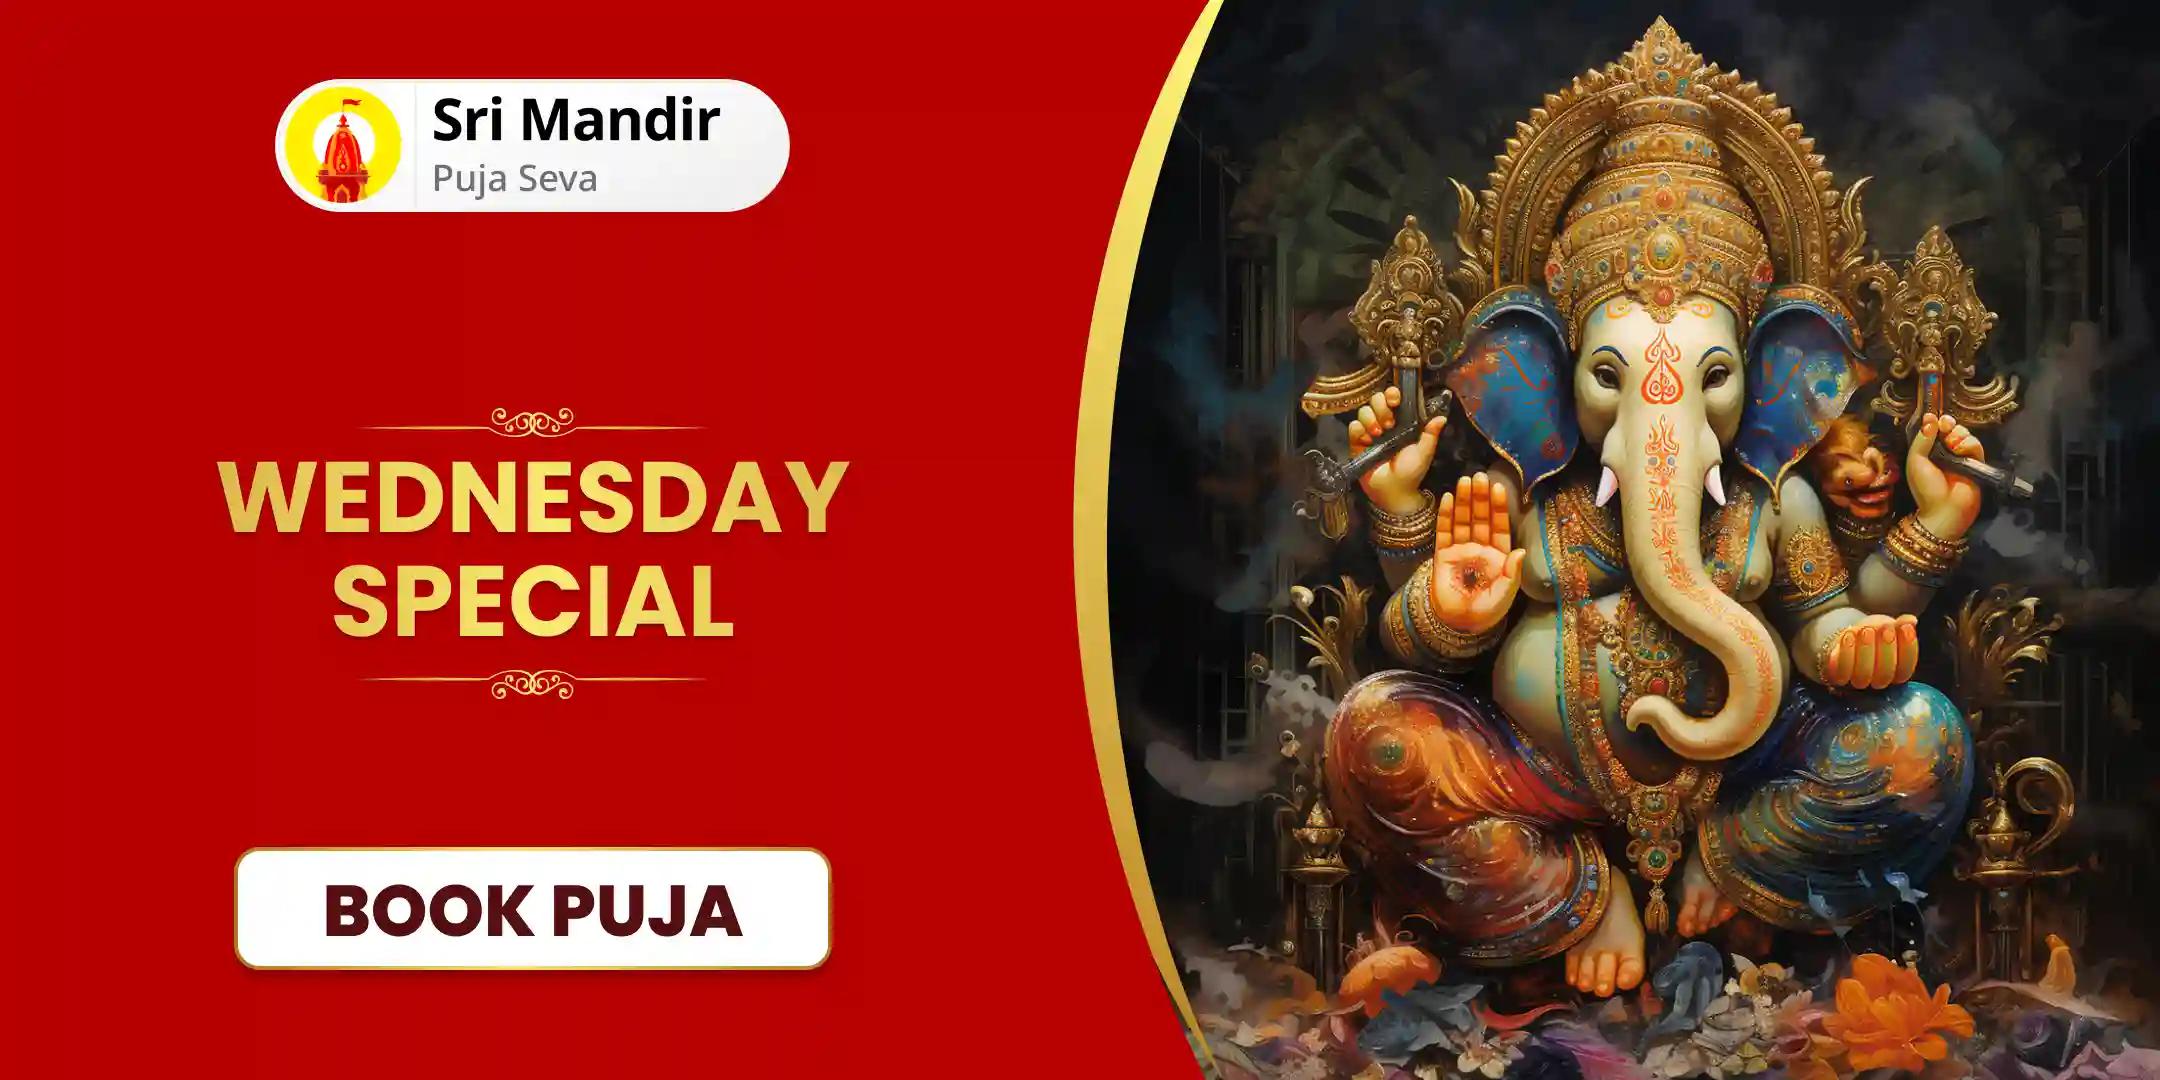 Wednesday Special Ucchista Ganesh Stotra Path & Tantrokta Havan and 1008 Ganesh Mool Mantra Jaap for Protection from Negative Energies and Removal of Obstacles